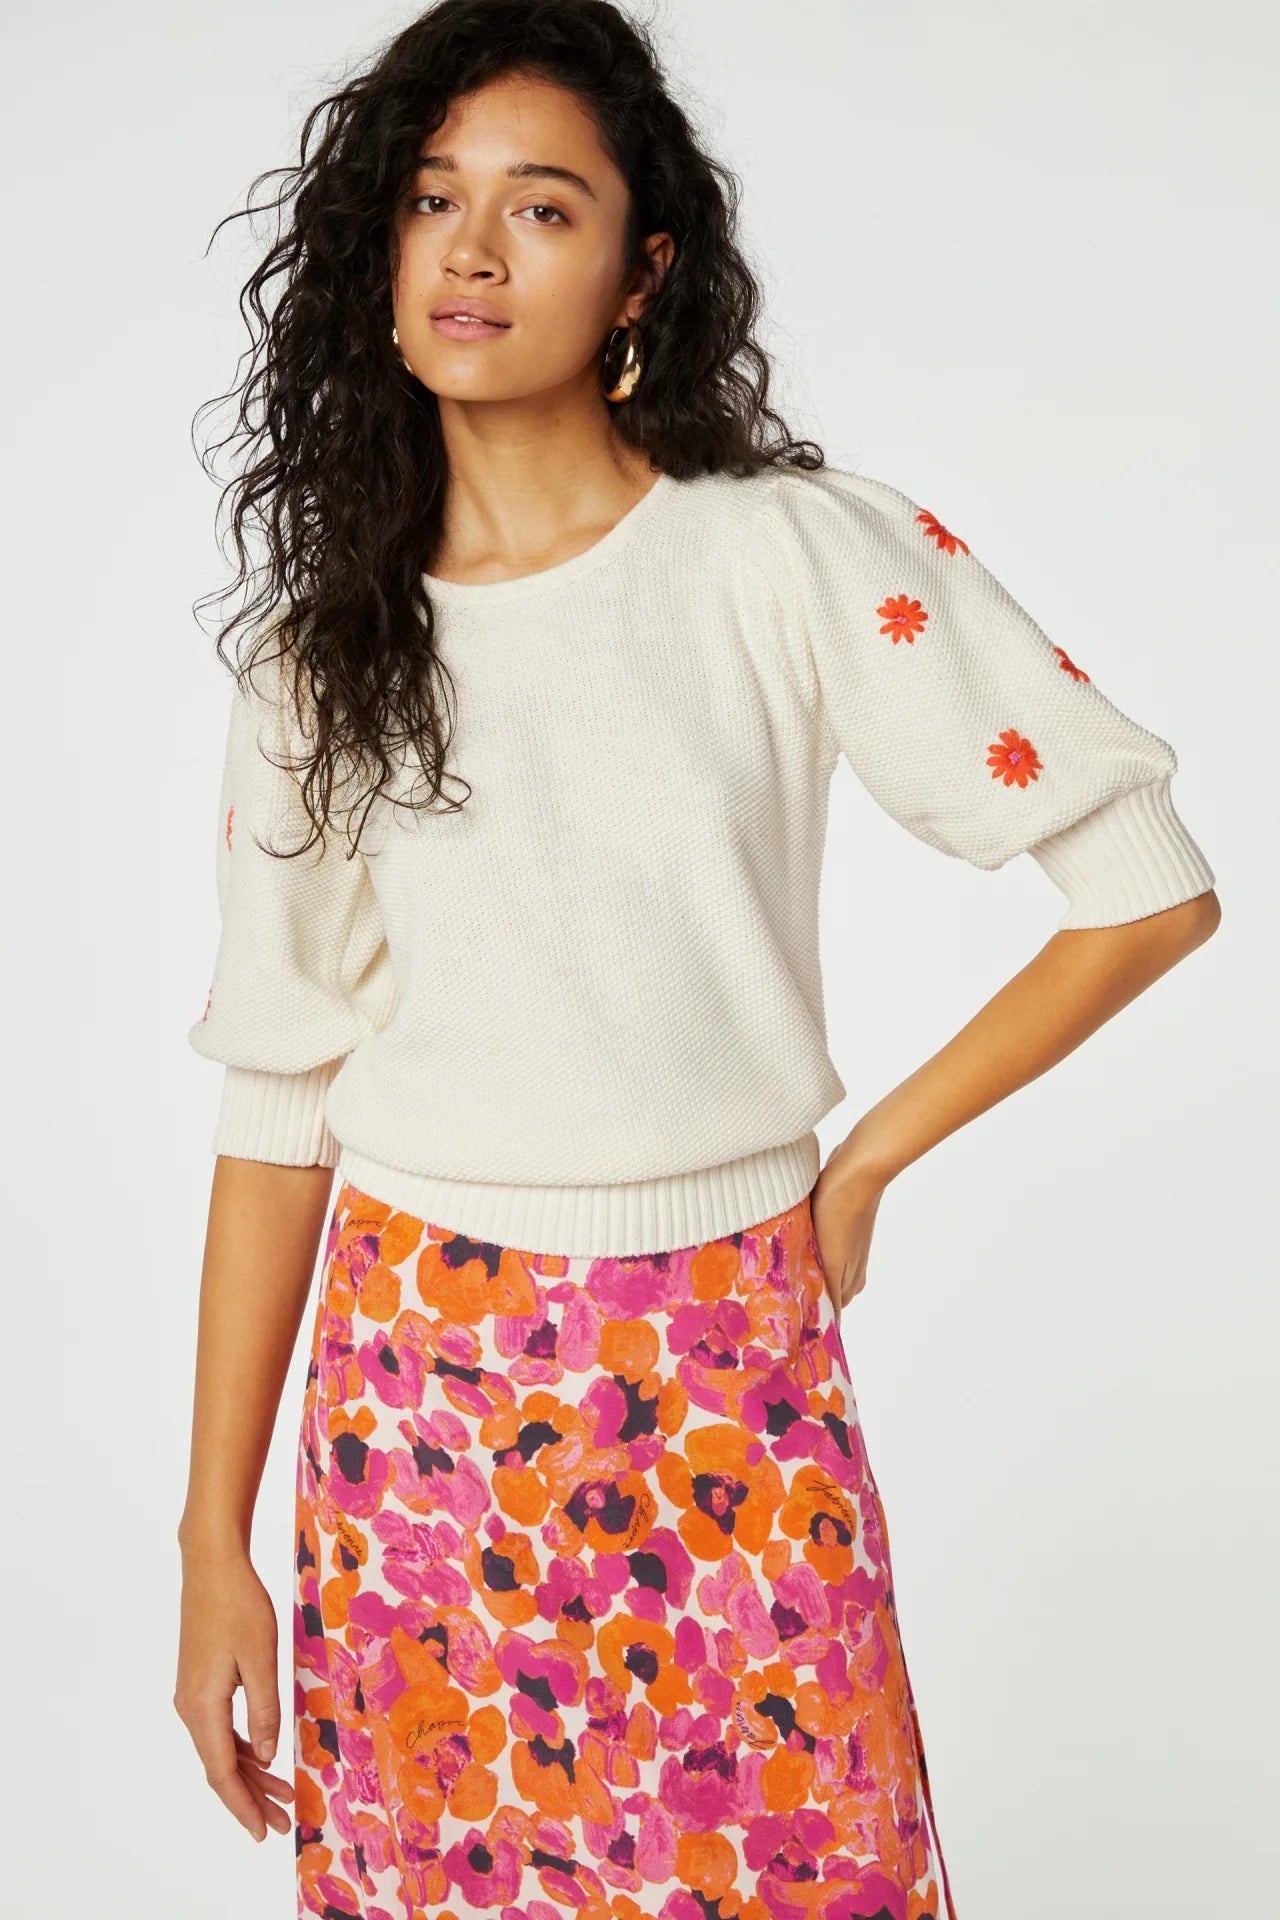 Model wears 3/4 sleeve knit jumper with orange embroidered flowers on sleeves